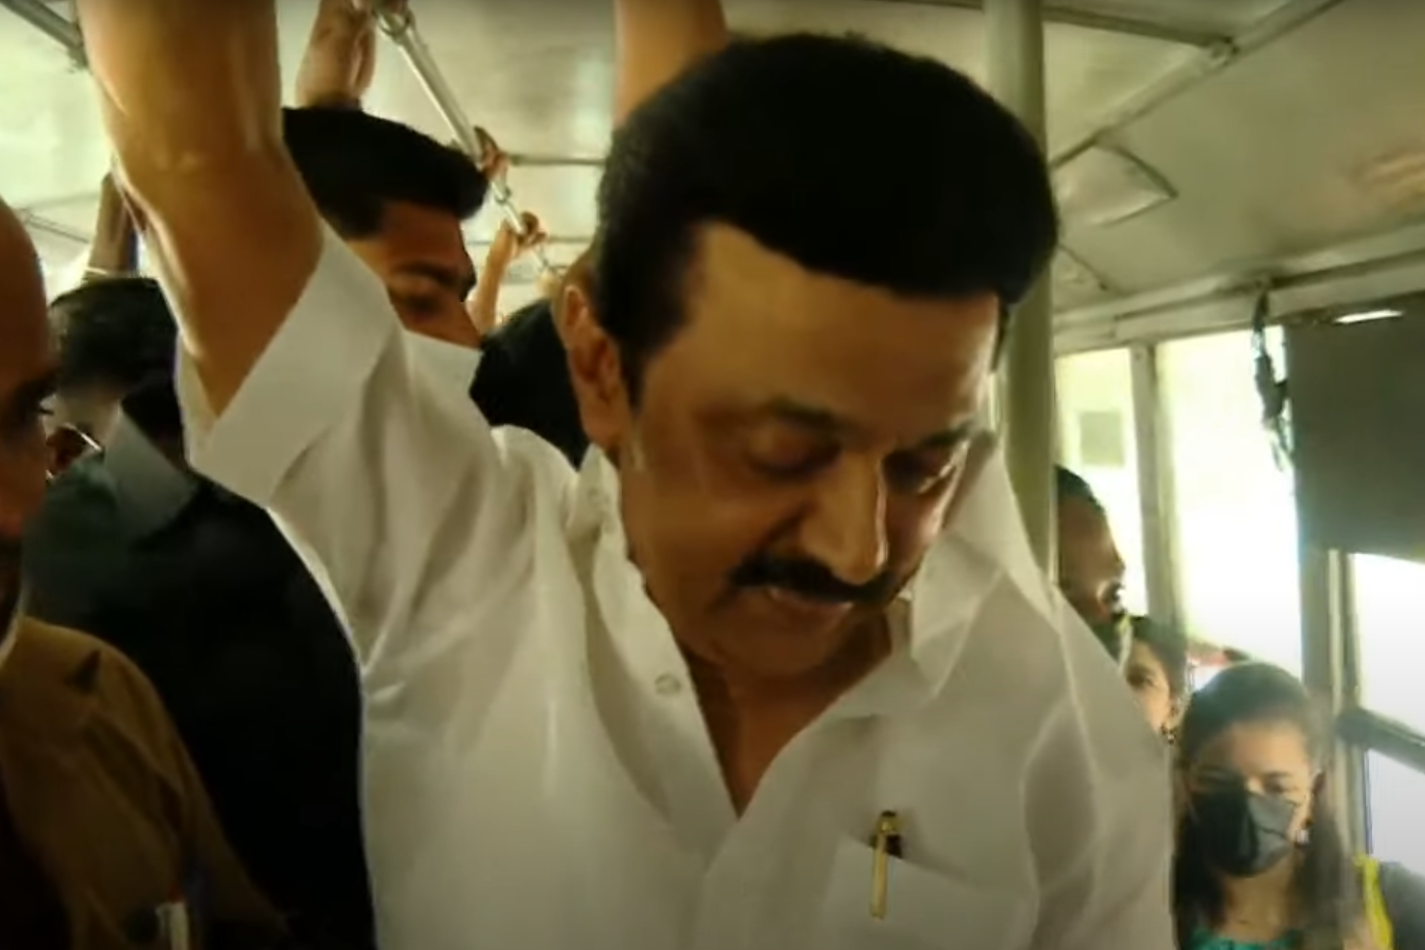 Stalin marks DMK govts first anniversary with bus travel